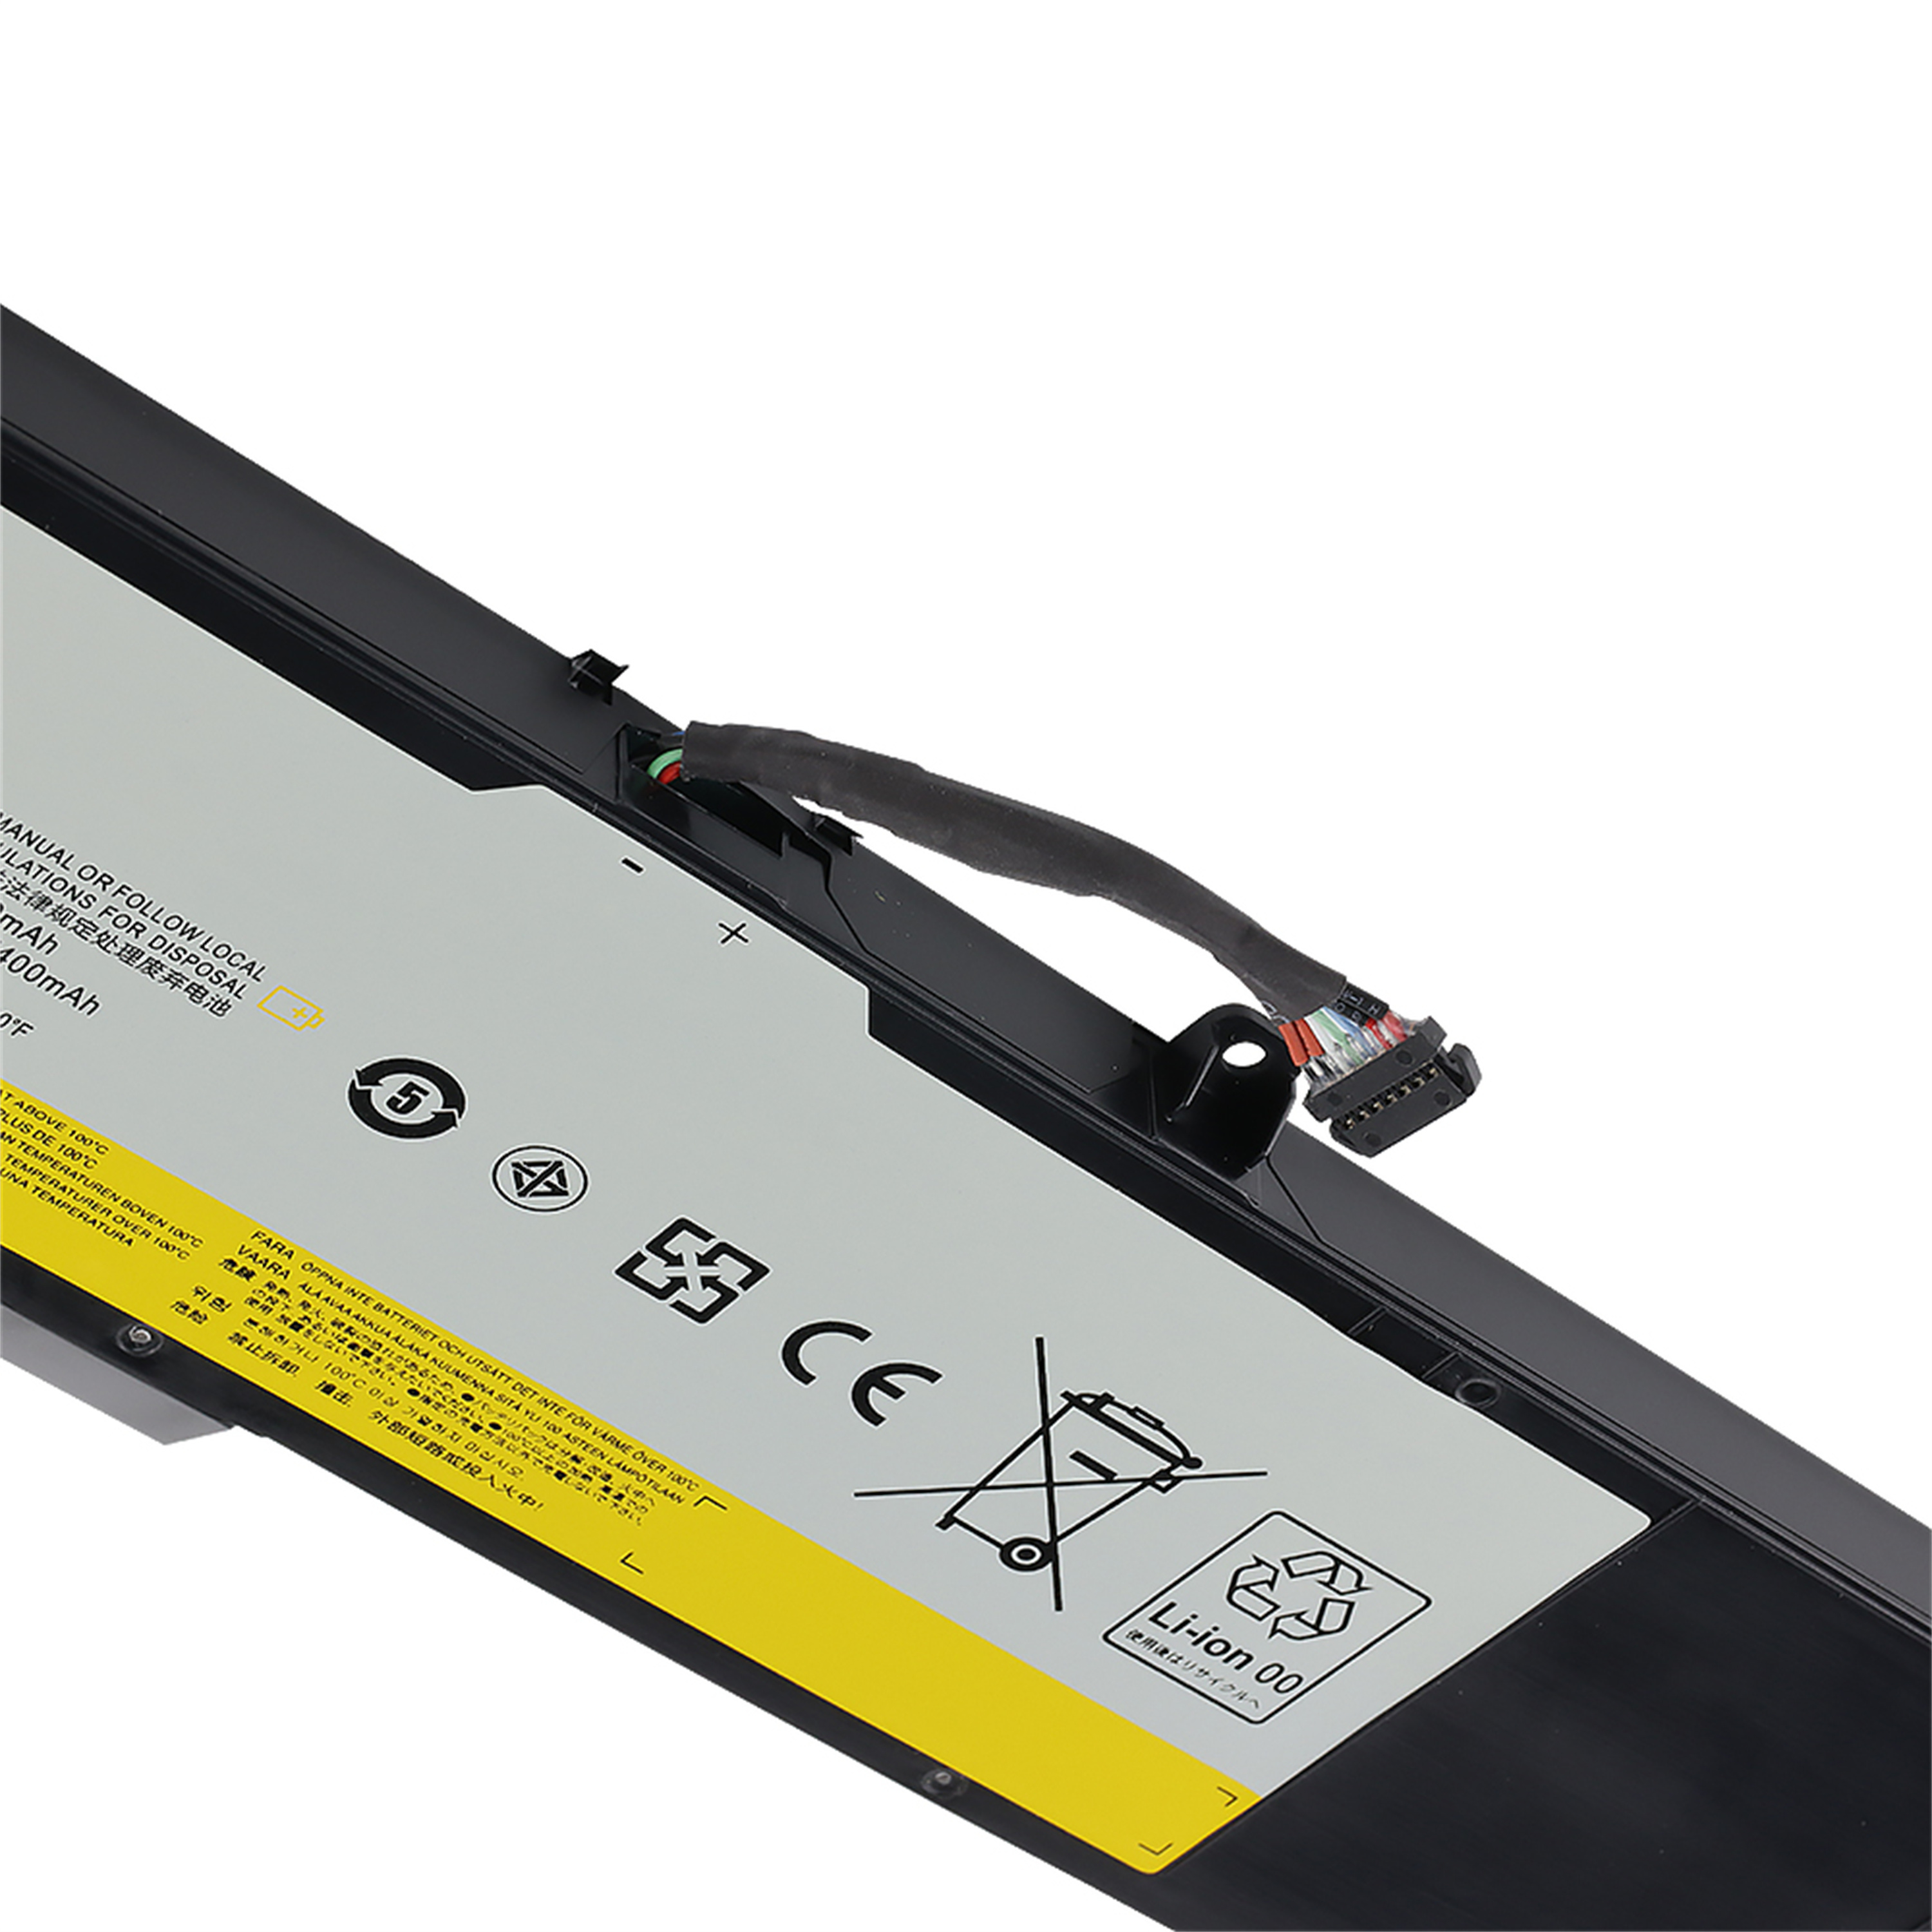 L13M4P02 rechargeable lithium ion Notebook battery Laptop battery For with Lenovo Erazer Y50-70 Y50-80 Y50P Y50P-70 Series Notebook 7.4V 54W